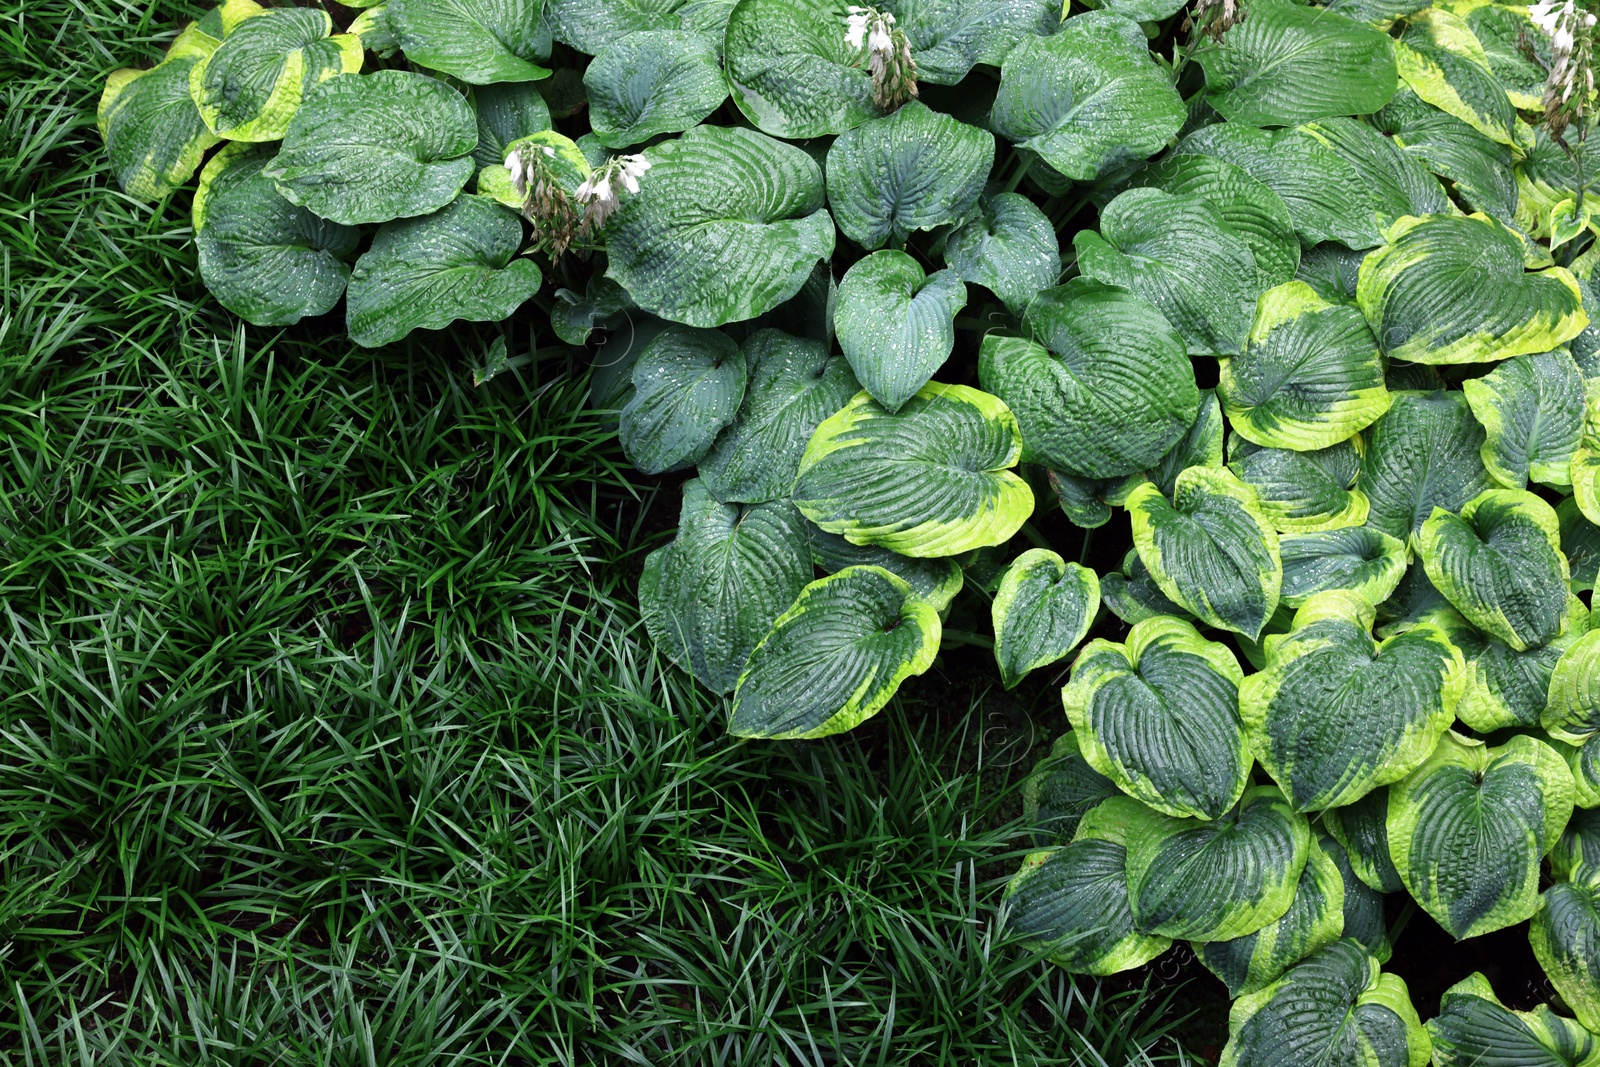 Photo of Beautiful hostas and green grass outdoors, top view